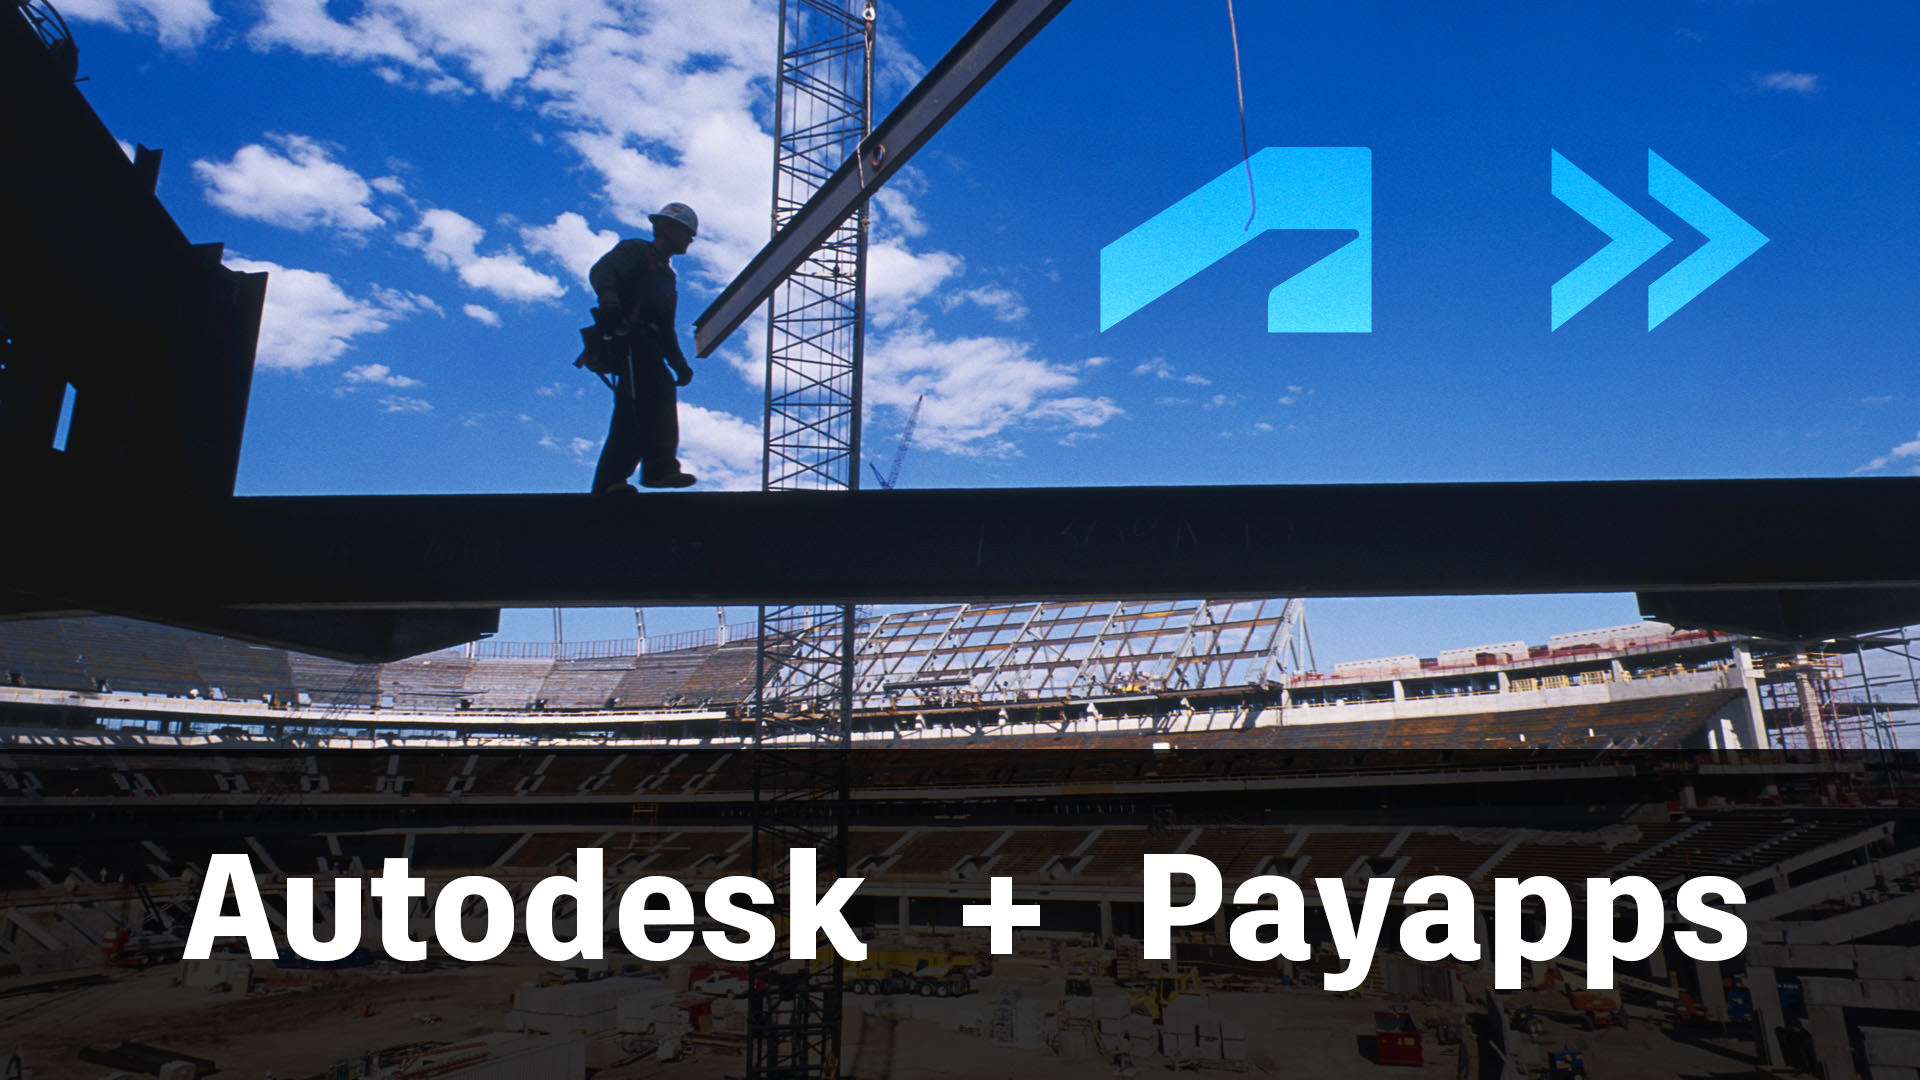 Autodesk + Payapps logos with a background of a construction site